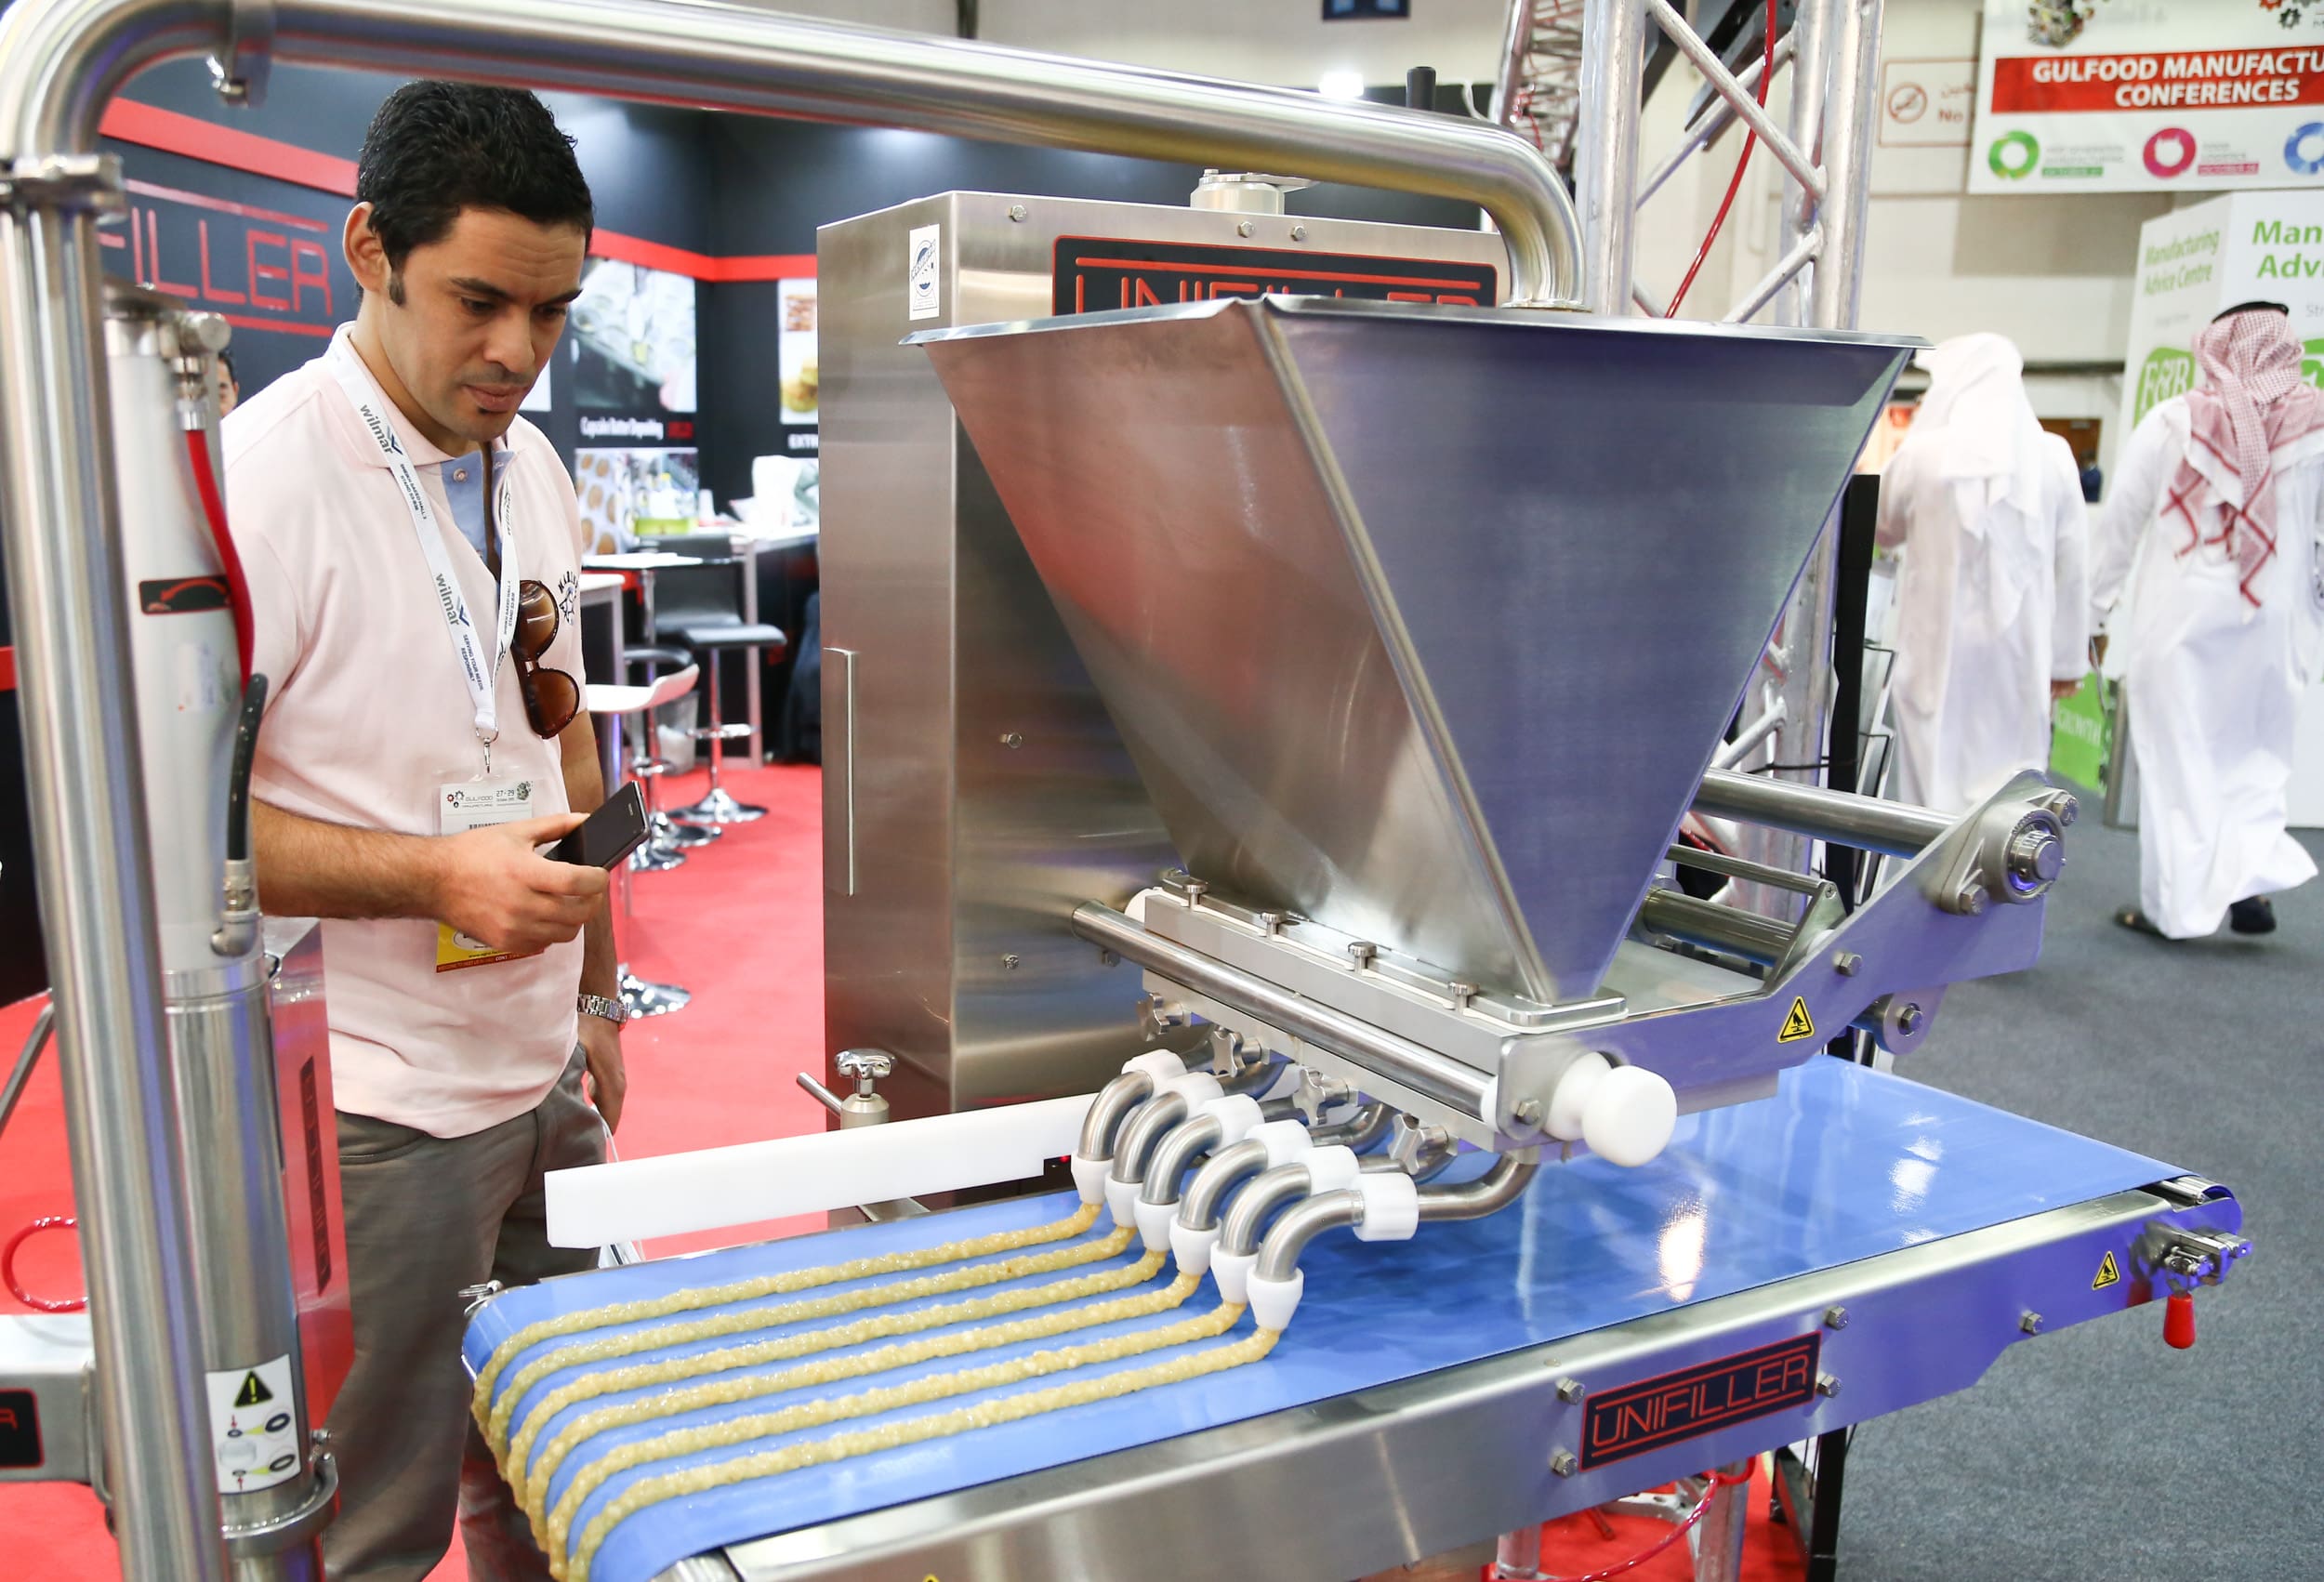 gulfood-manufacturing-2016-will-host-1600-international-food-manufacture